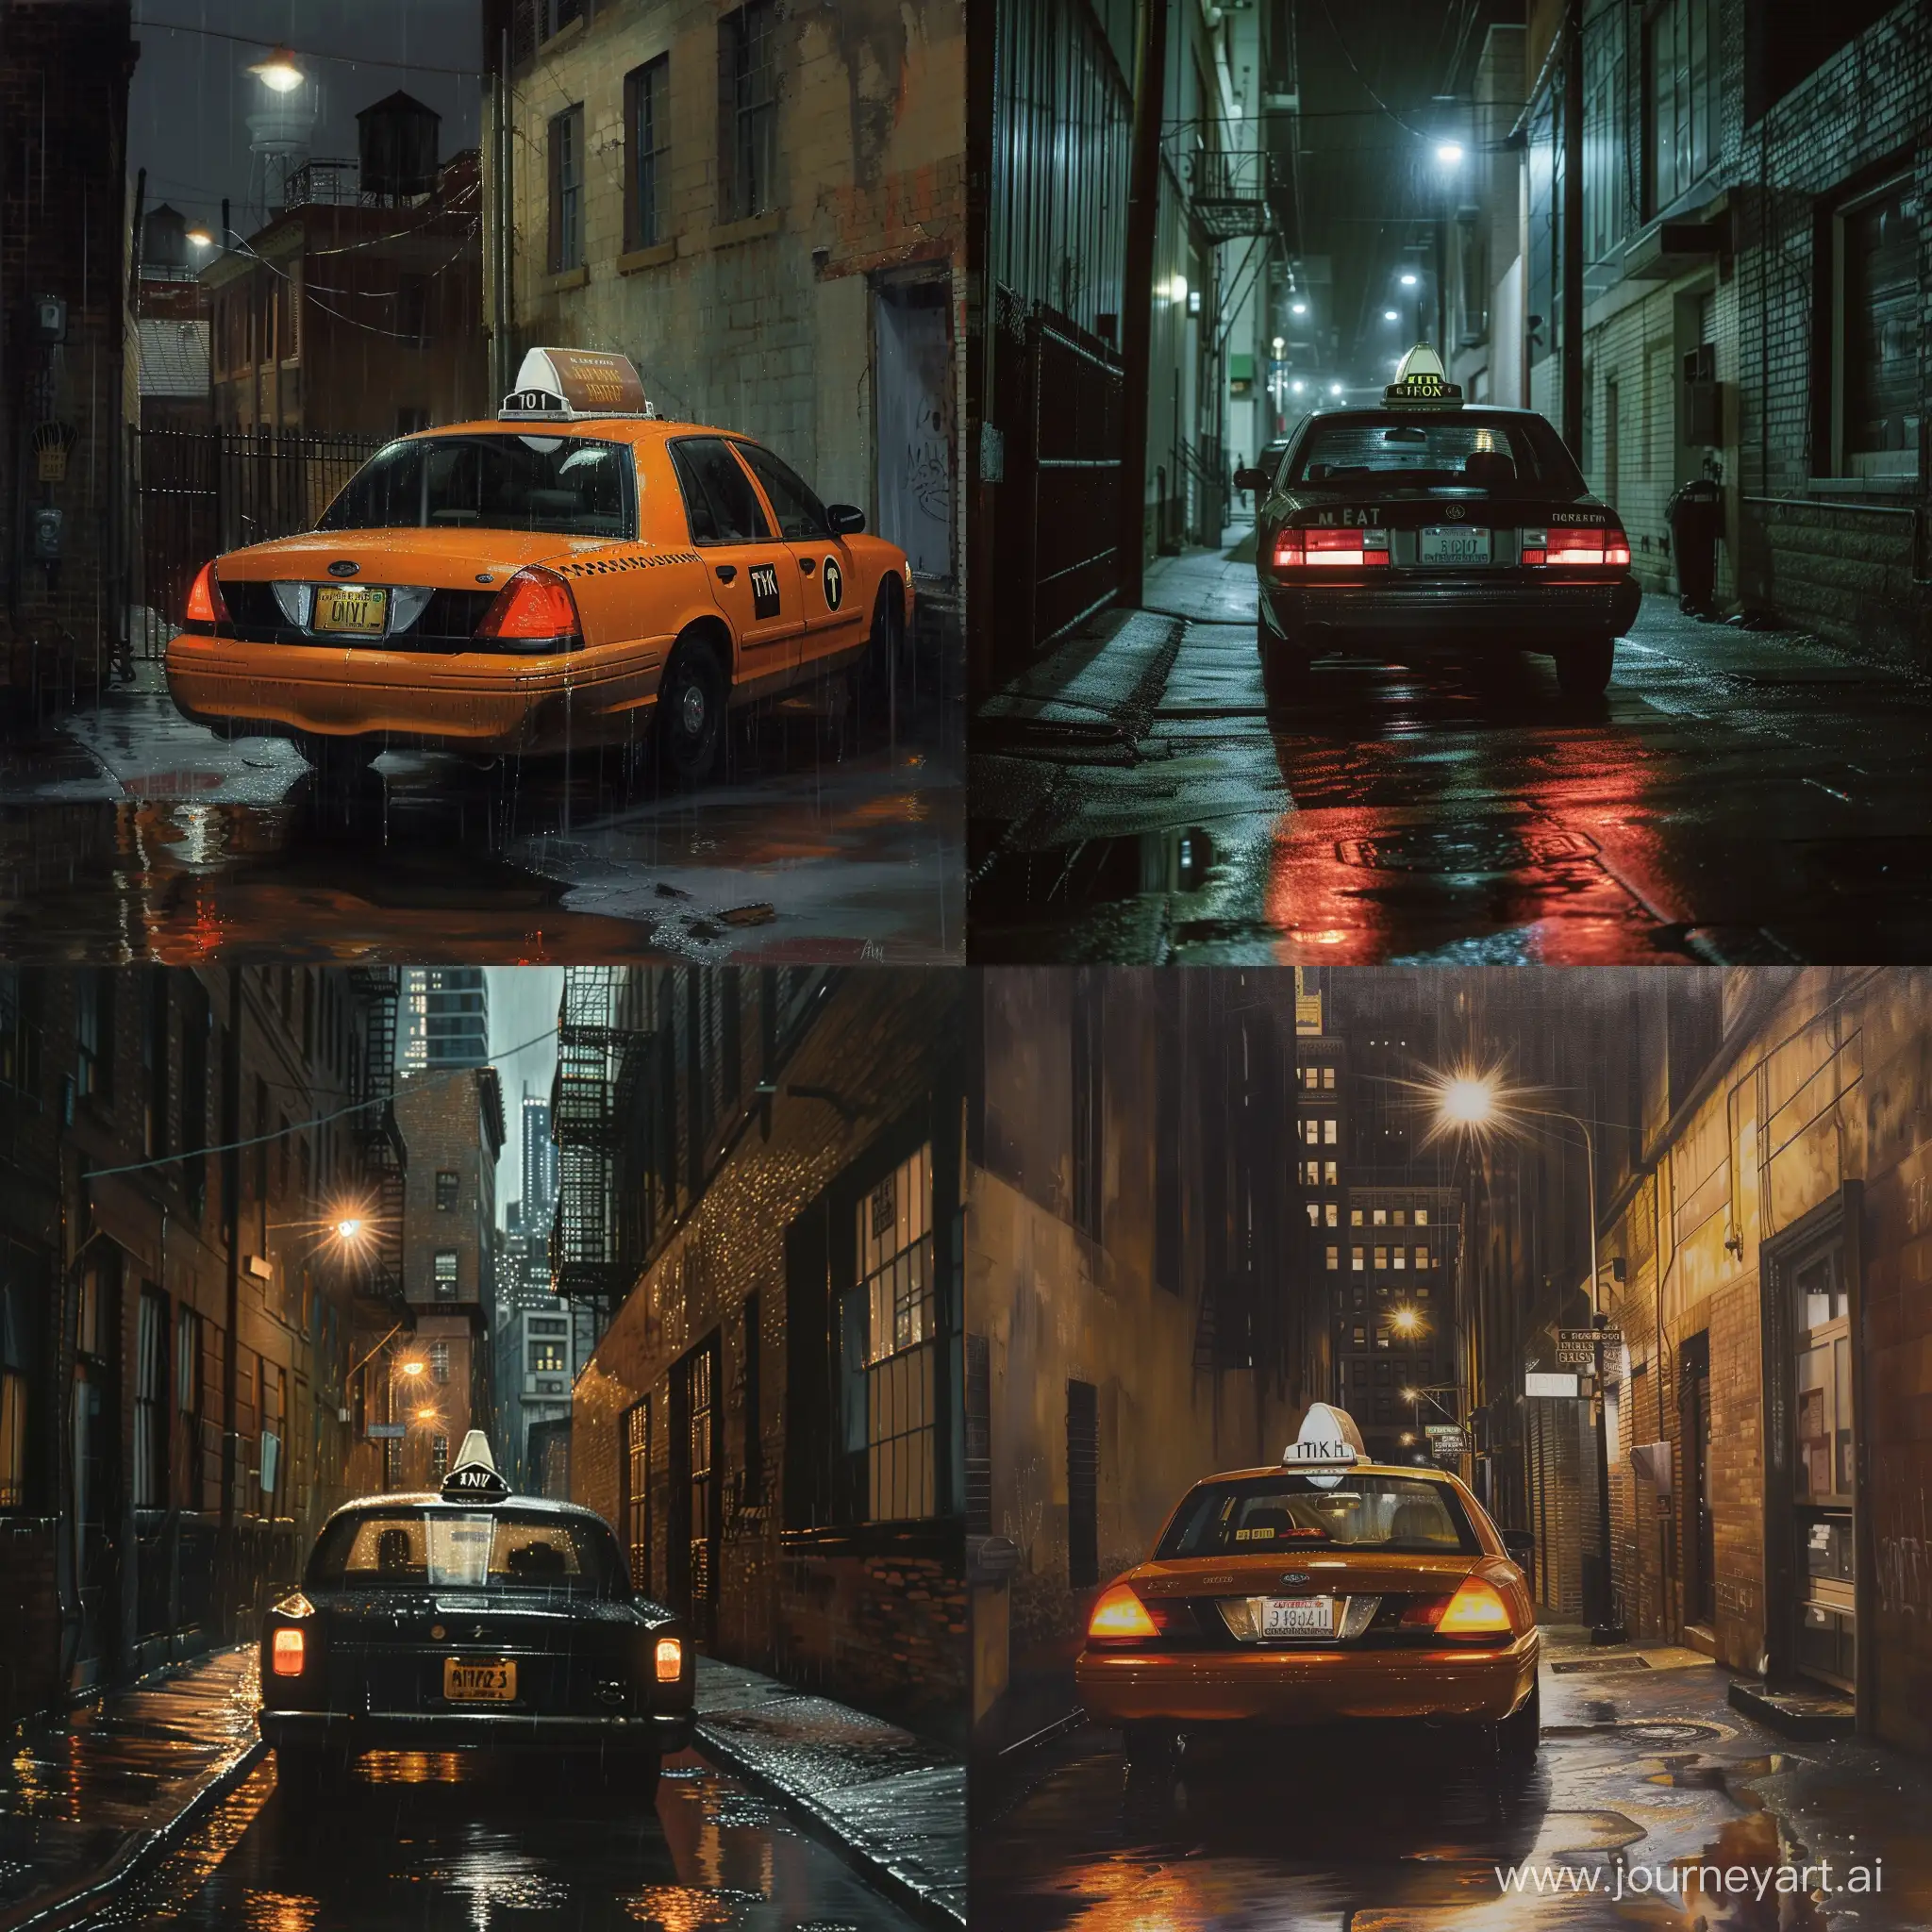 A Taxi Car in the Quiet Alley, Rainy Night --v 6 --ar 1:1 --no 25841